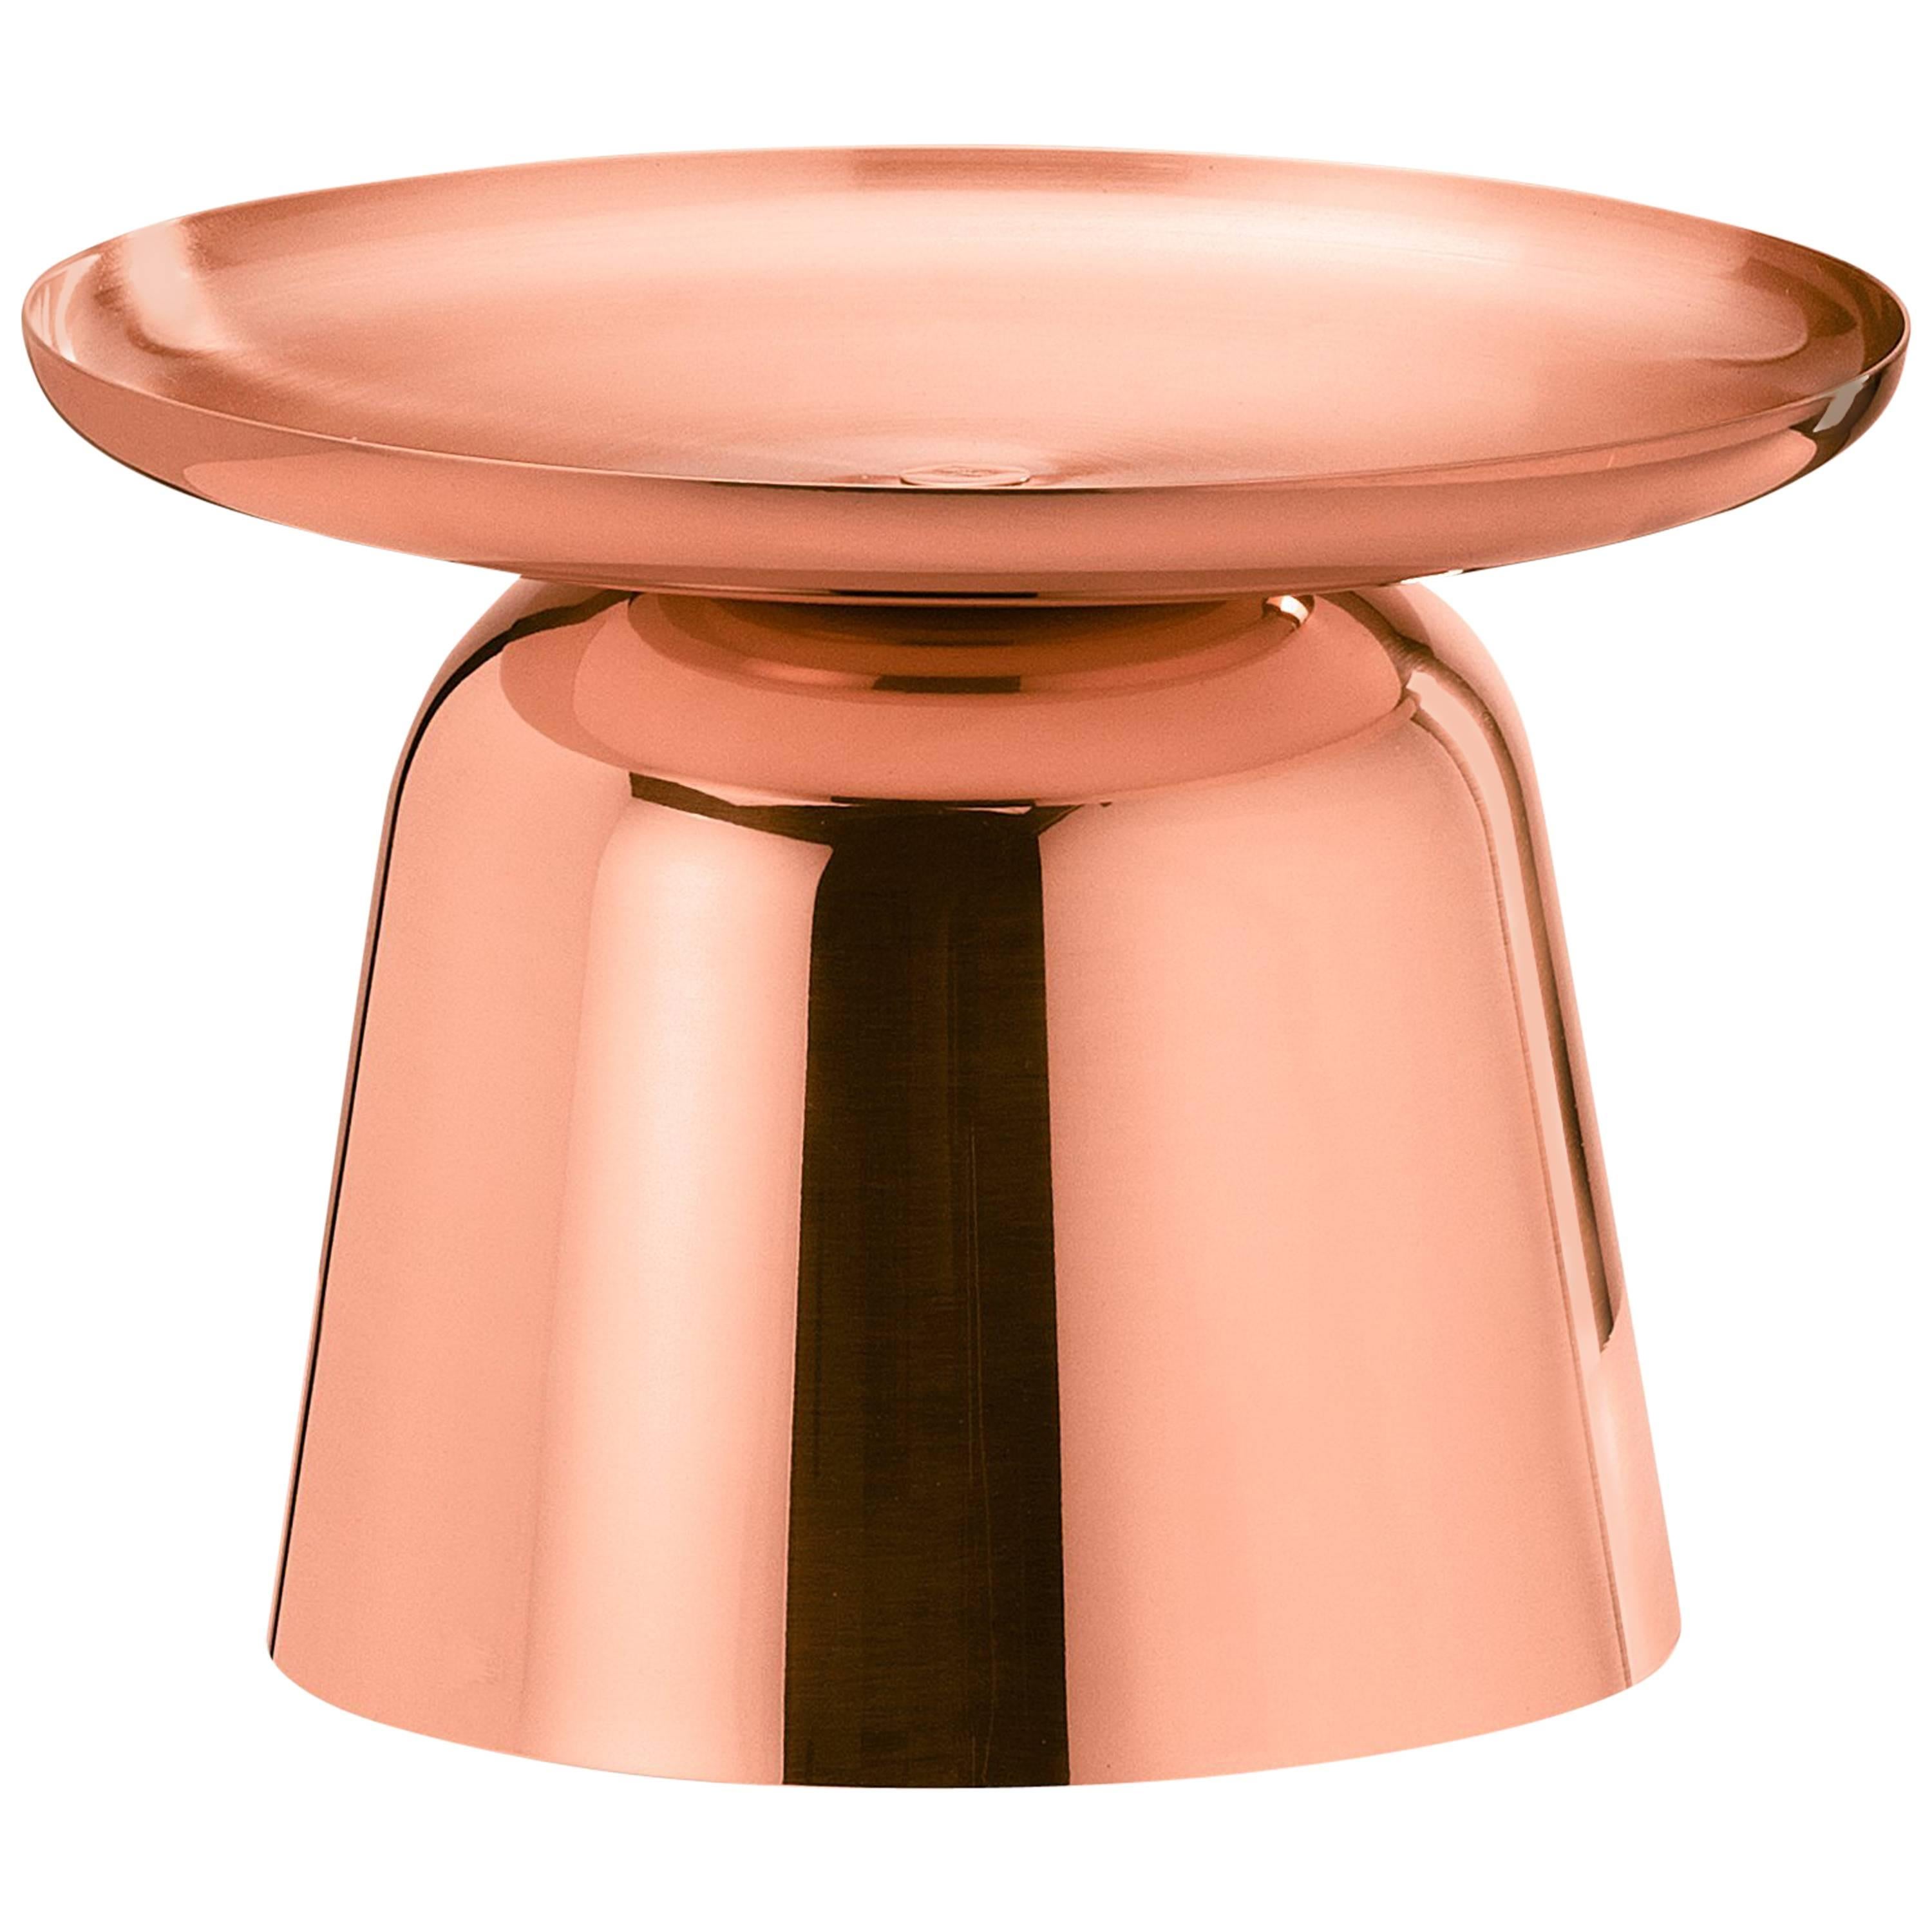 Ghidini 1961 Gil & Luc Small Vase in Rose Gold Finish